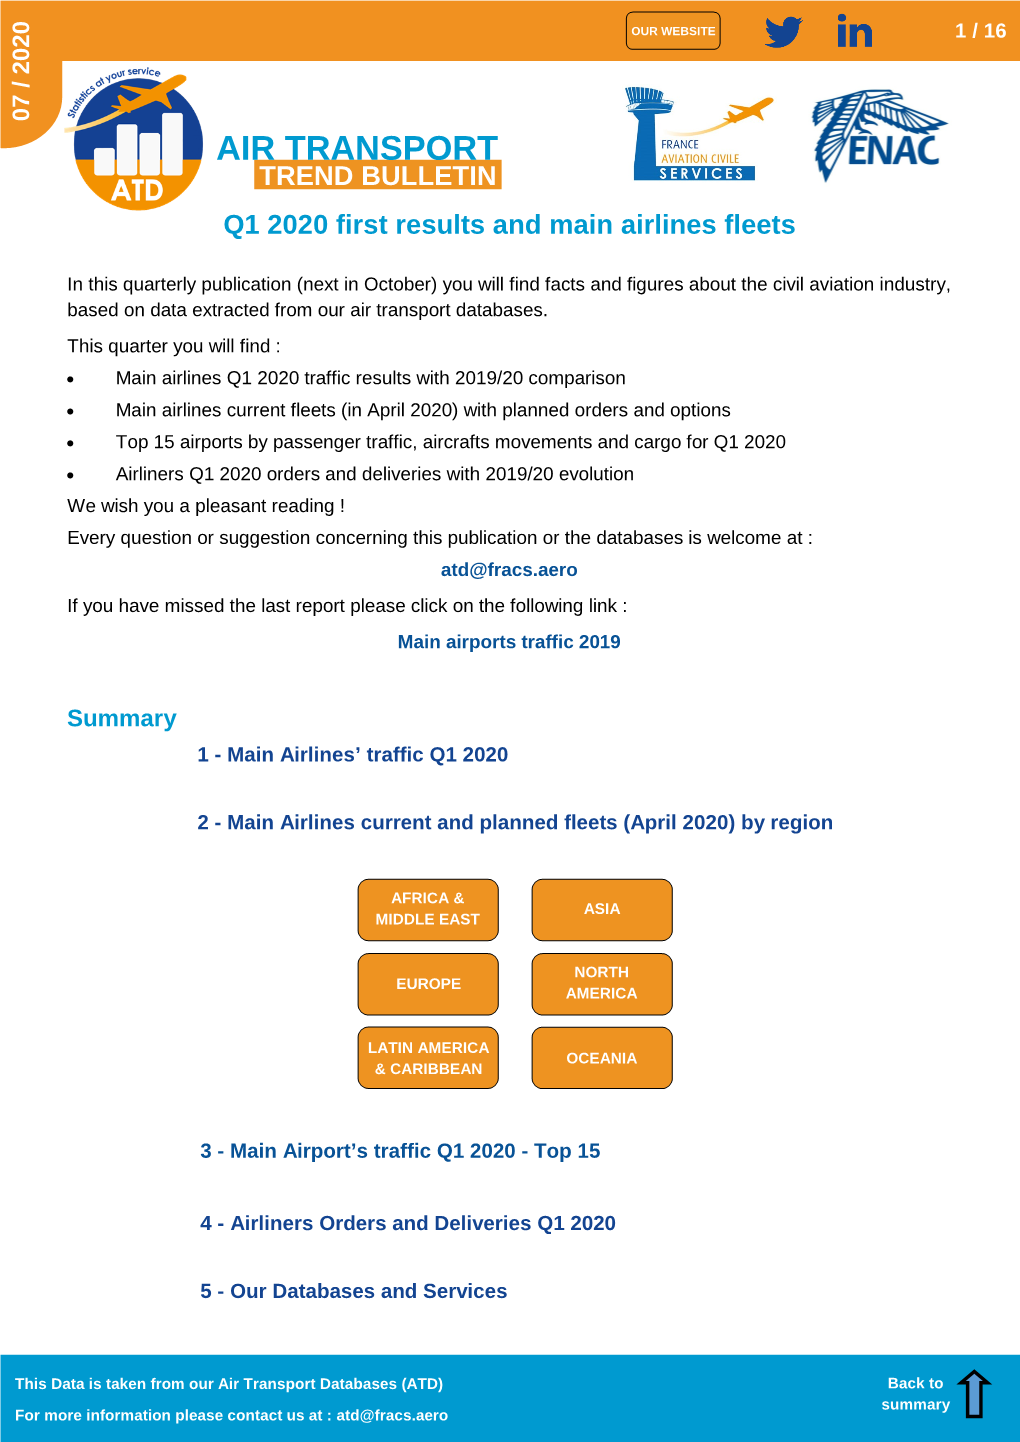 AIR TRANSPORT TREND BULLETIN Q1 2020 First Results and Main Airlines Fleets